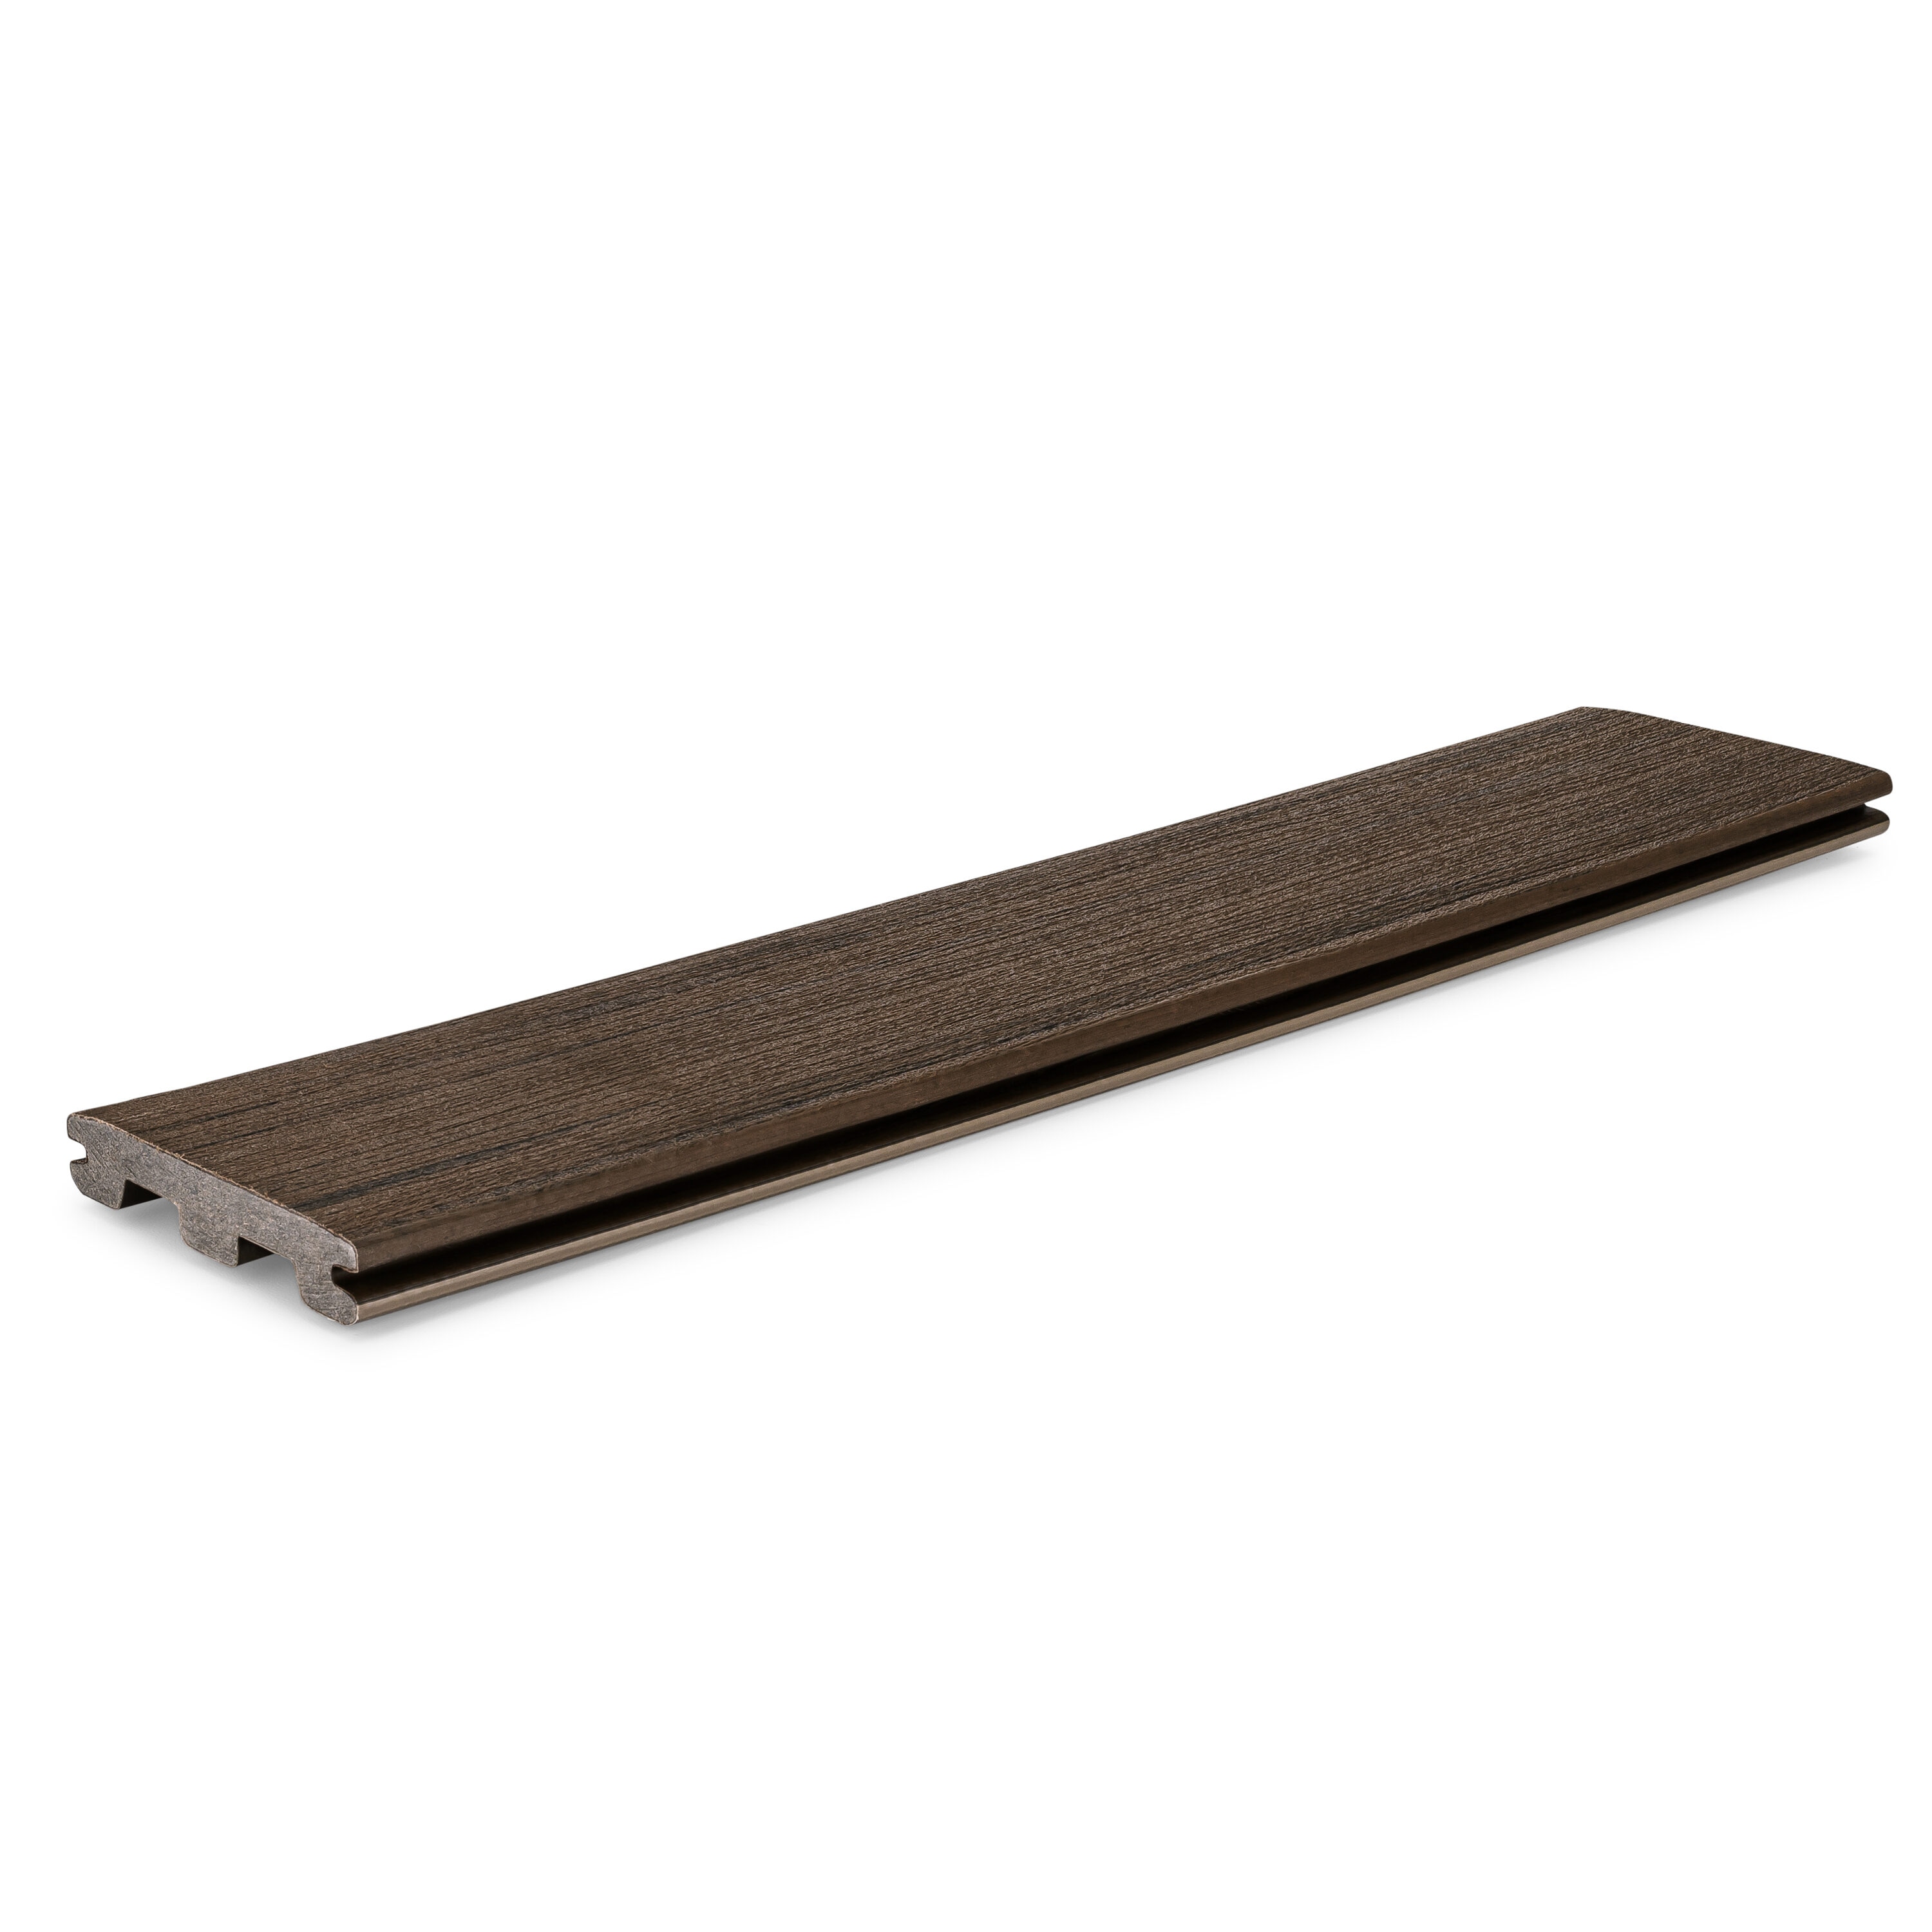 Prime+ 5/4-in x 6-in x 16-ft Dark Cocoa Grooved Composite Deck Board in Brown | - TimberTech PRGV5416DC